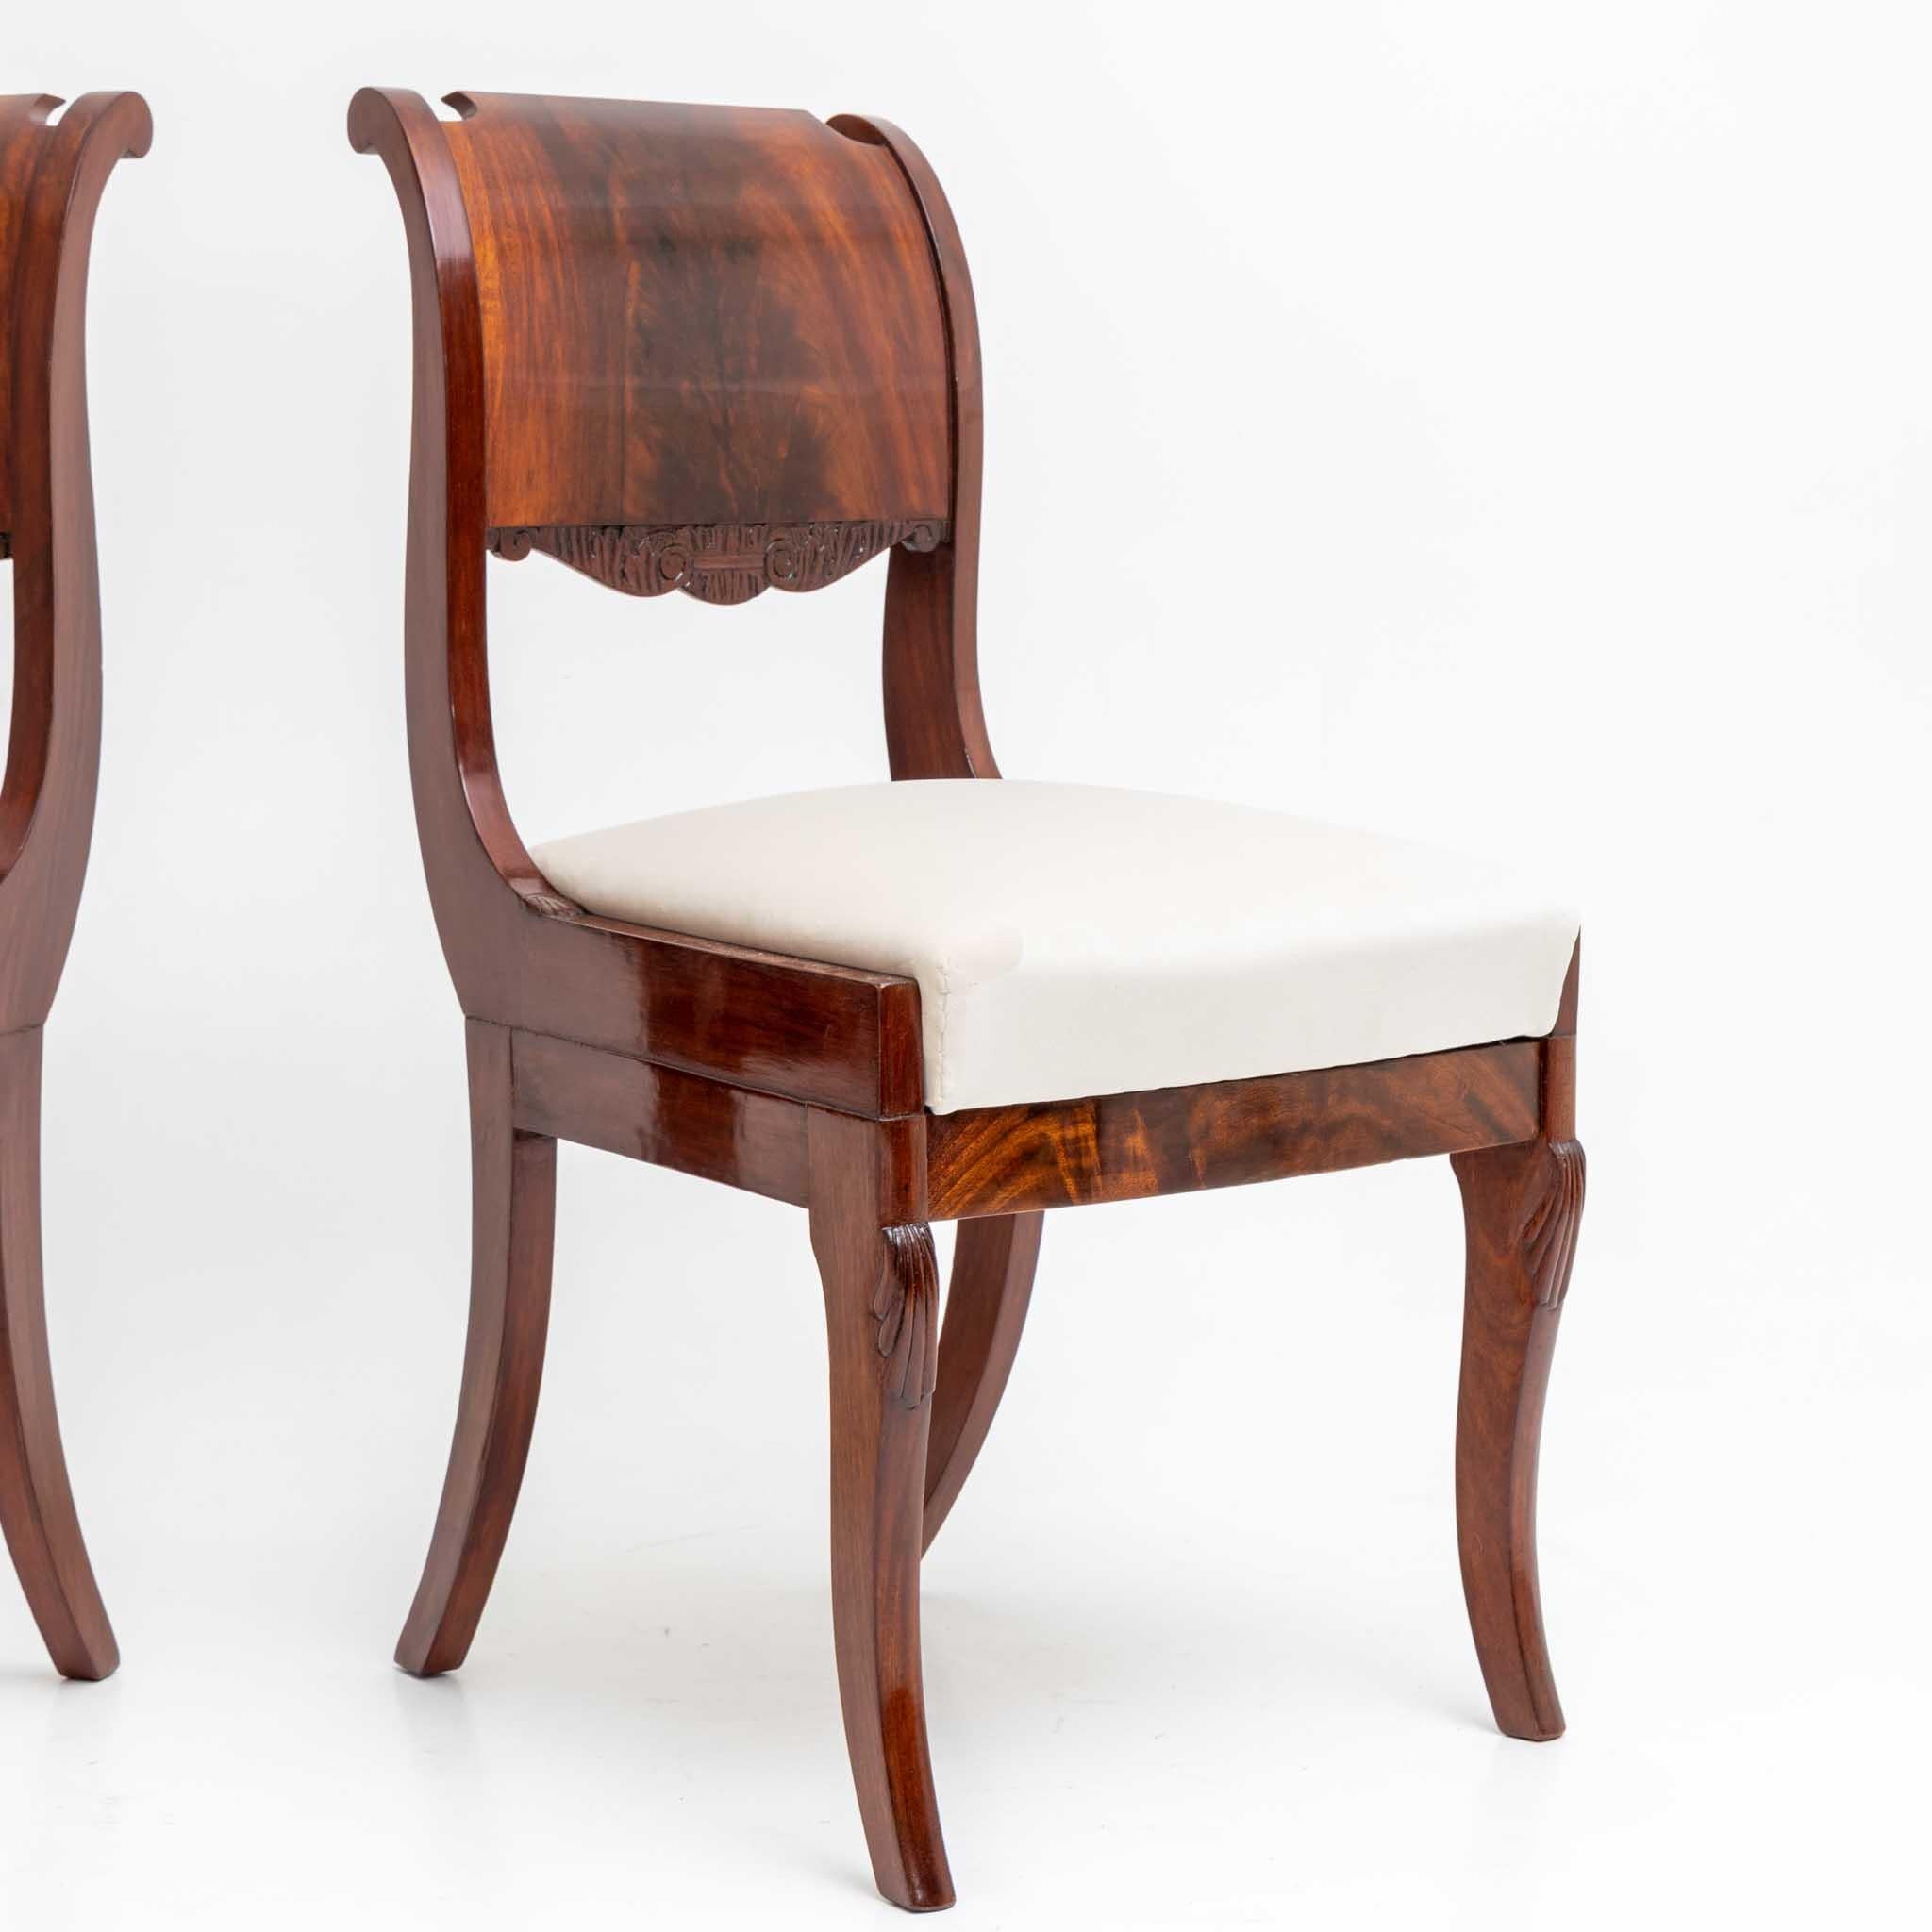 Pair of Chairs, Baltic States, Around 1830 For Sale 3